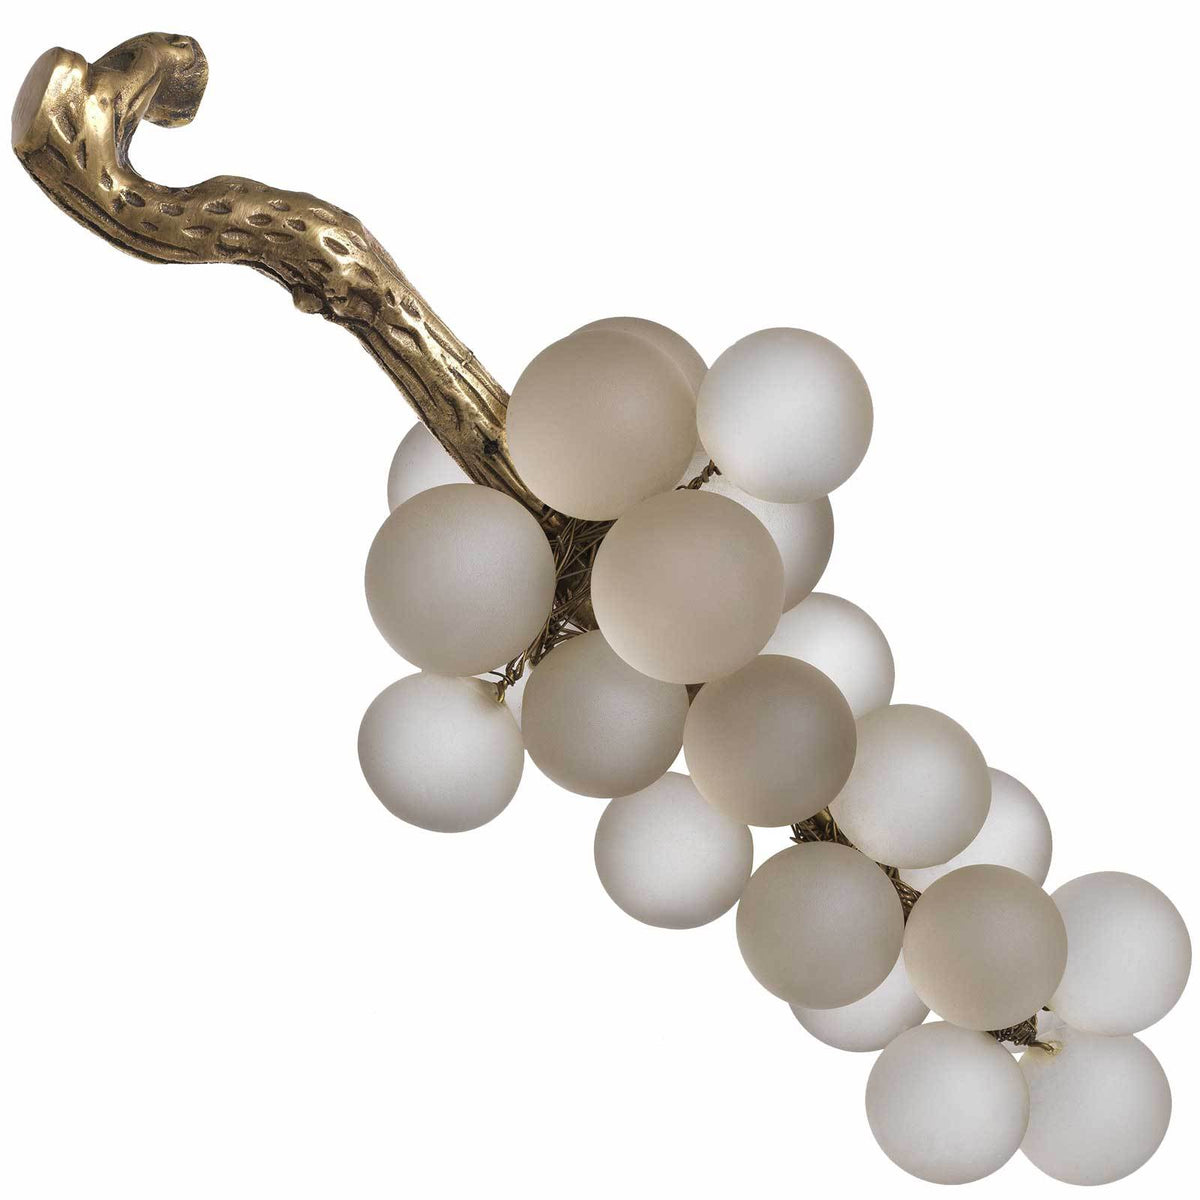 Objet French Grapes